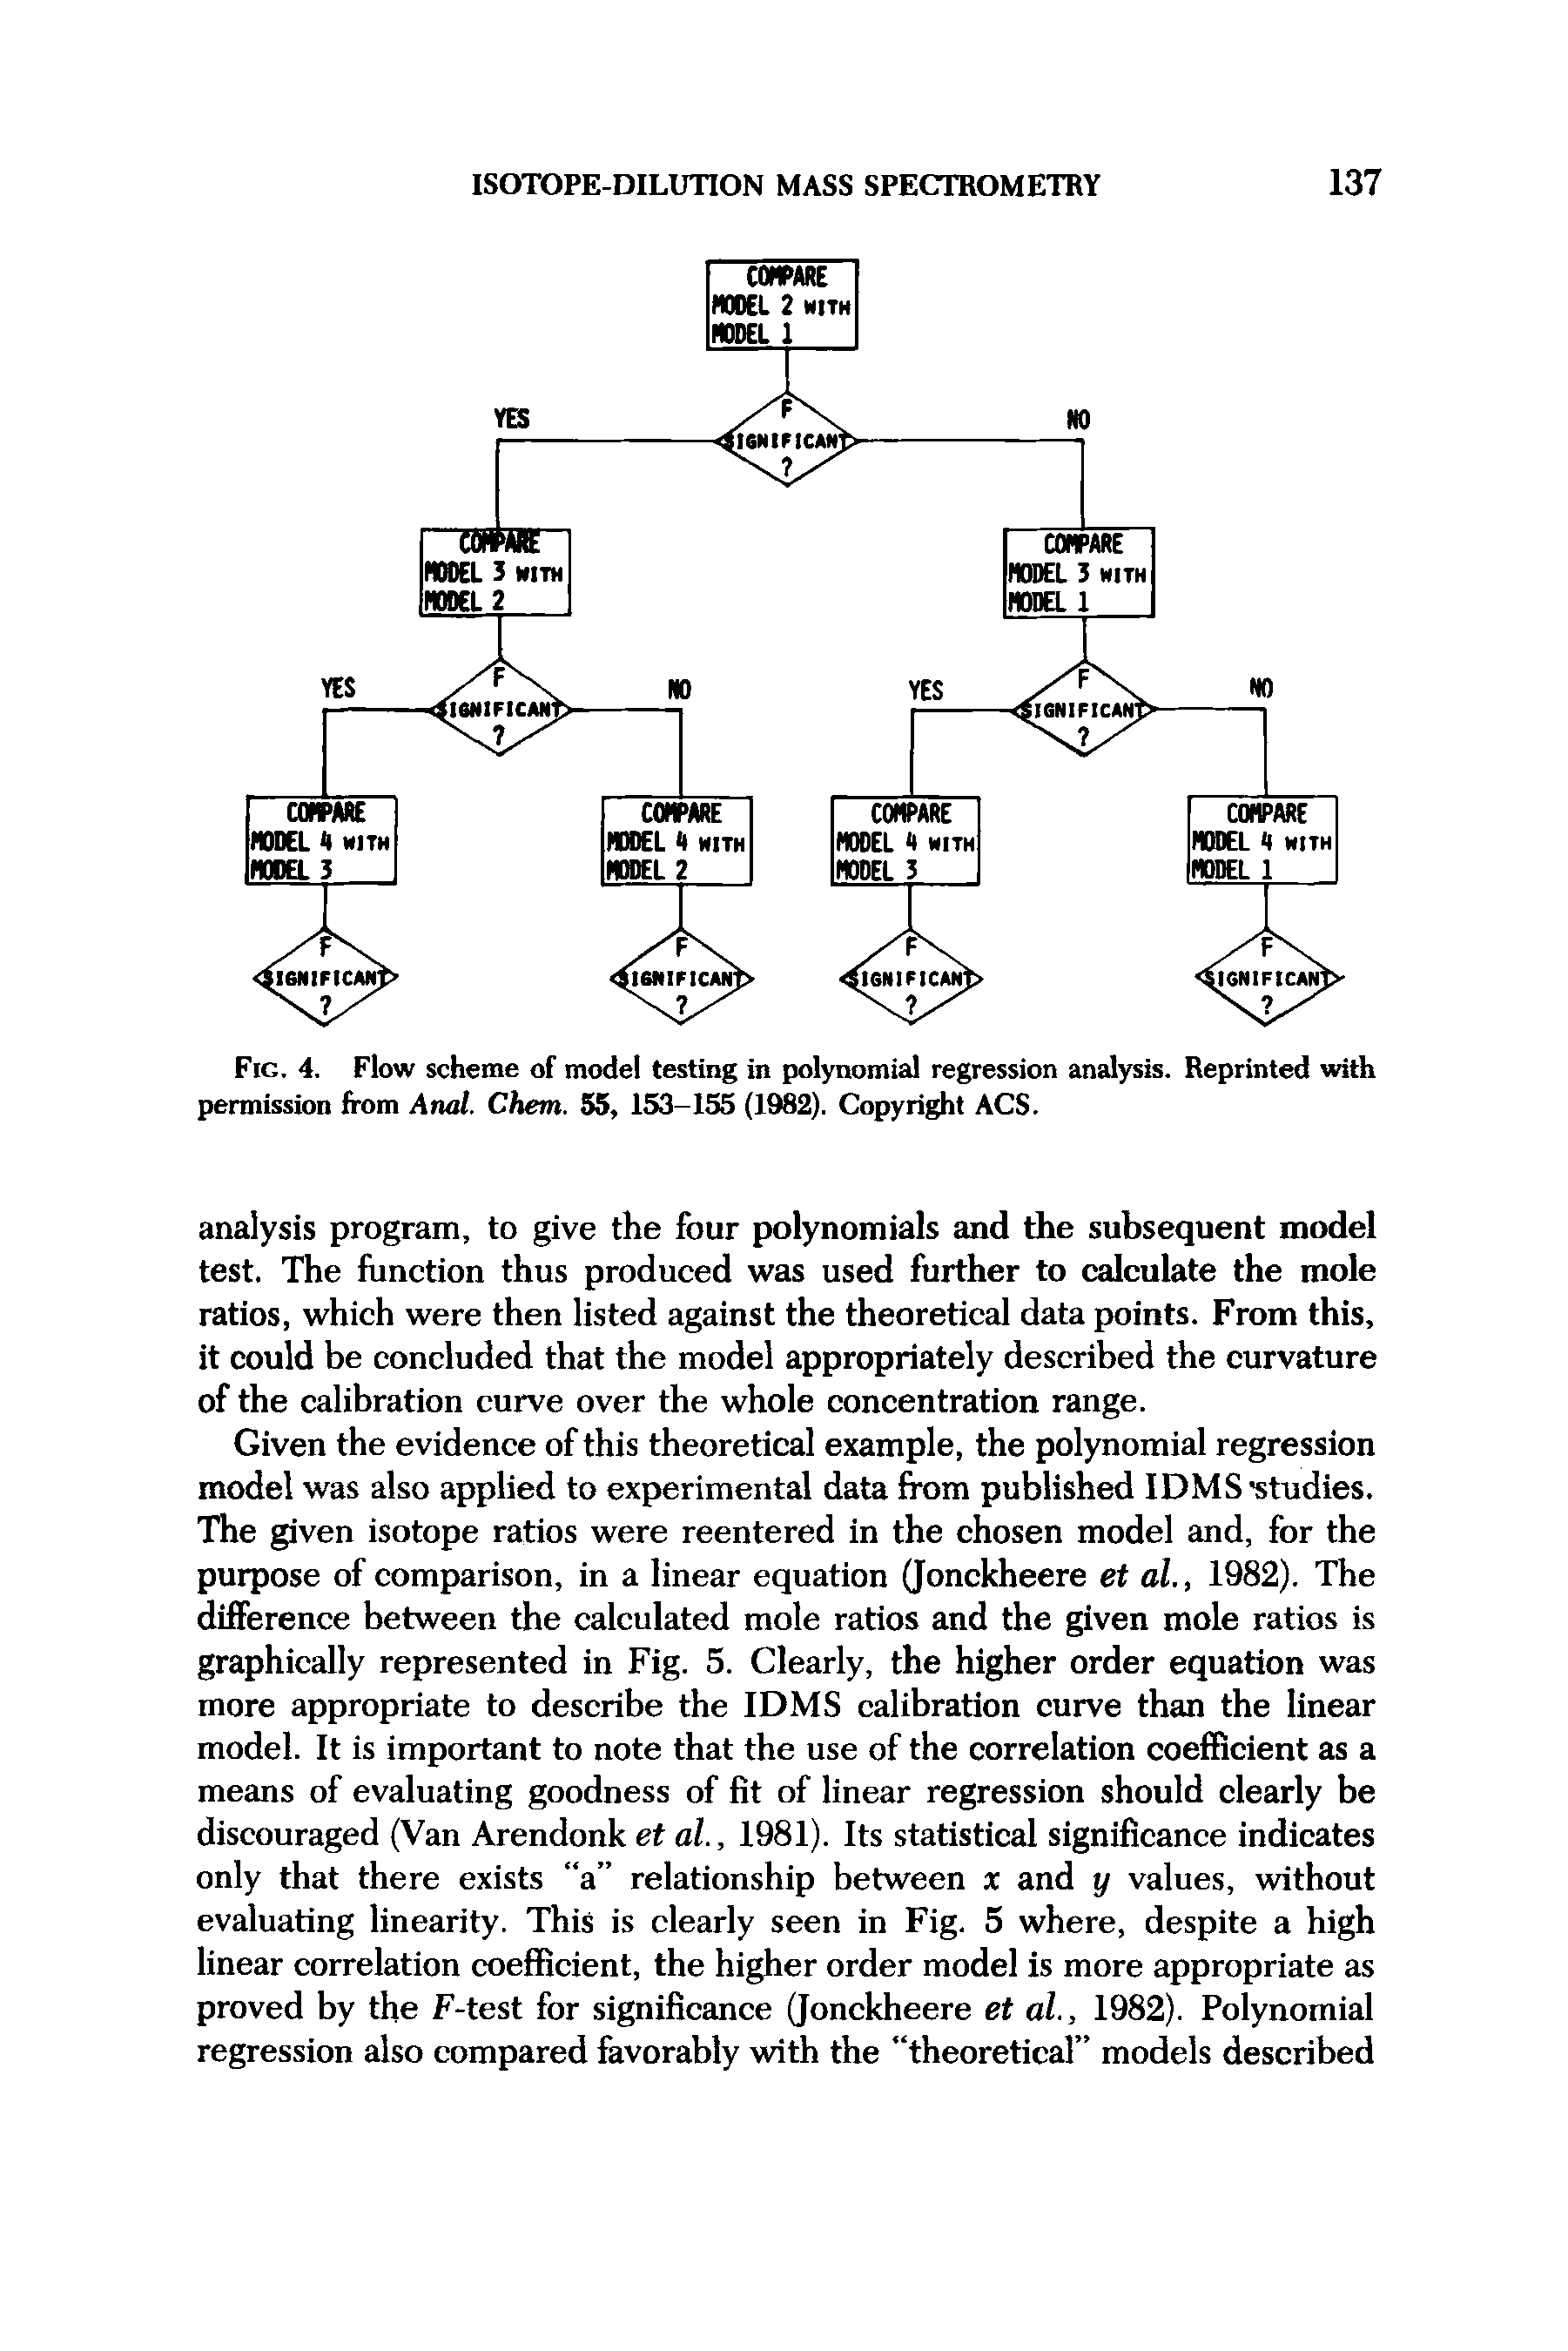 Fig. 4. Flow scheme of model testing in polynomial regression analysis. Reprinted with permission from Anal. Chem. 55, 153-155 (1982). Copyright ACS.